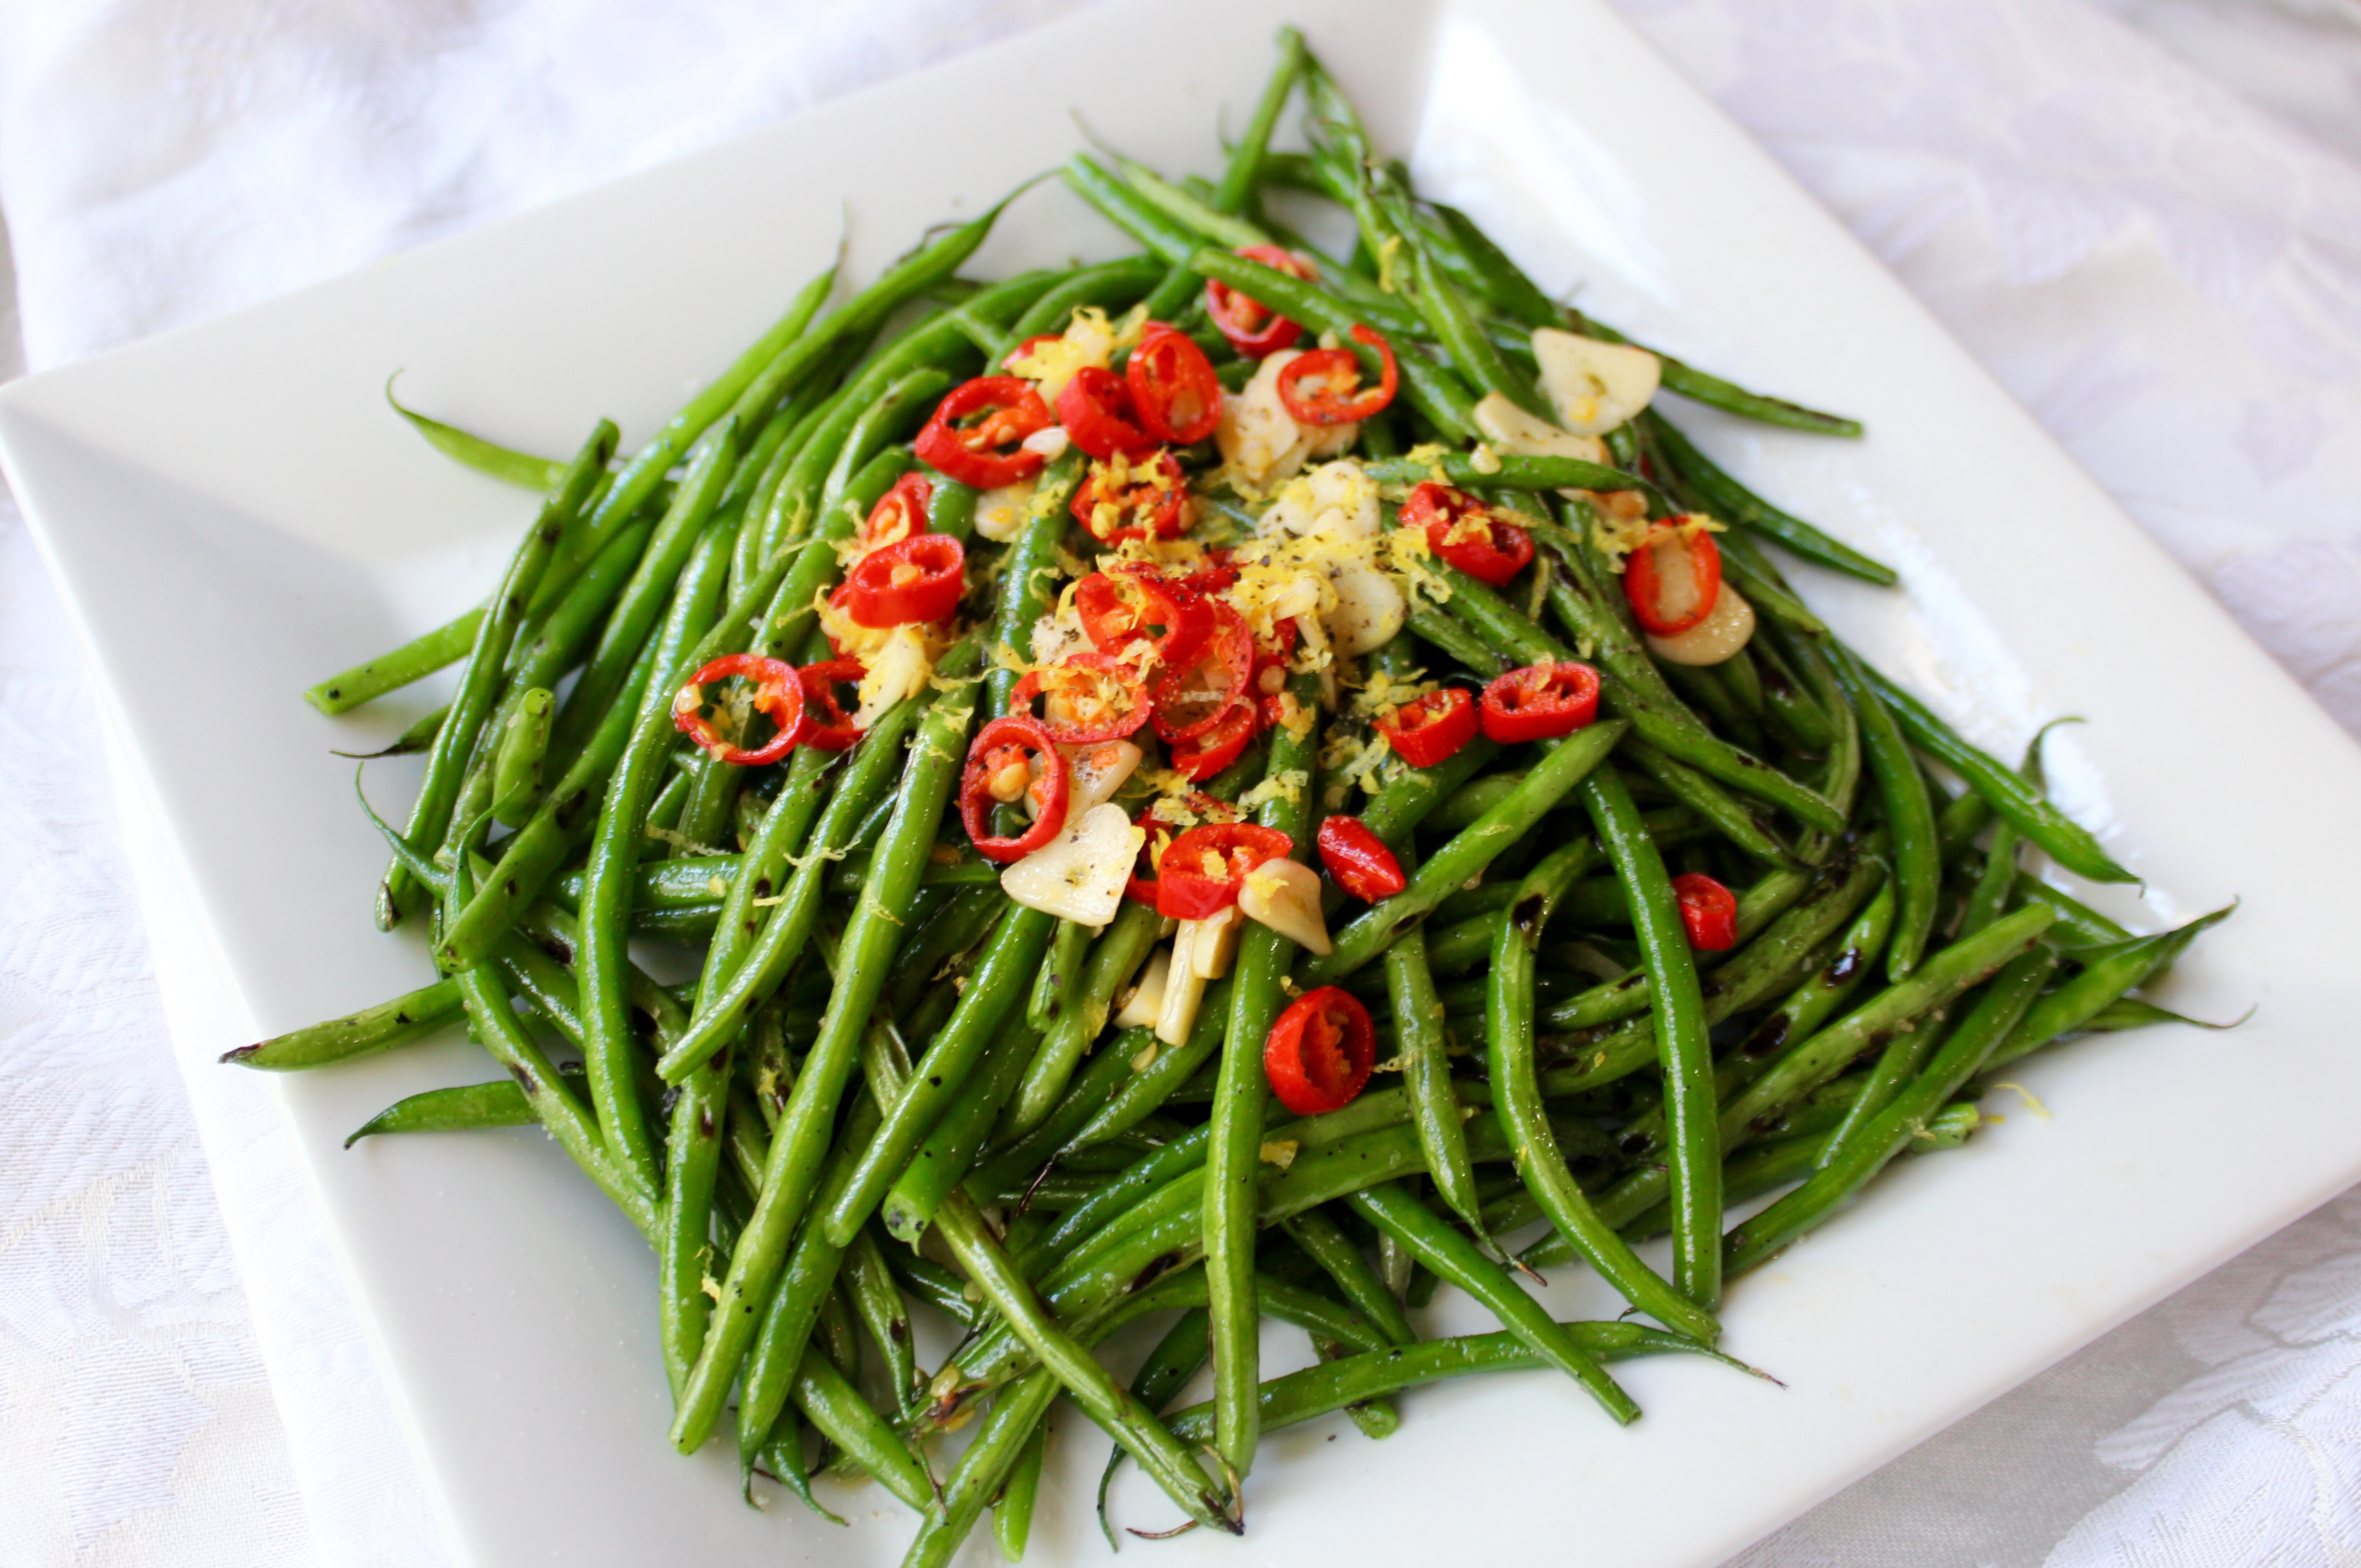 Chargrilled French Beans with Chili & Garlic – The Expat Dietitian